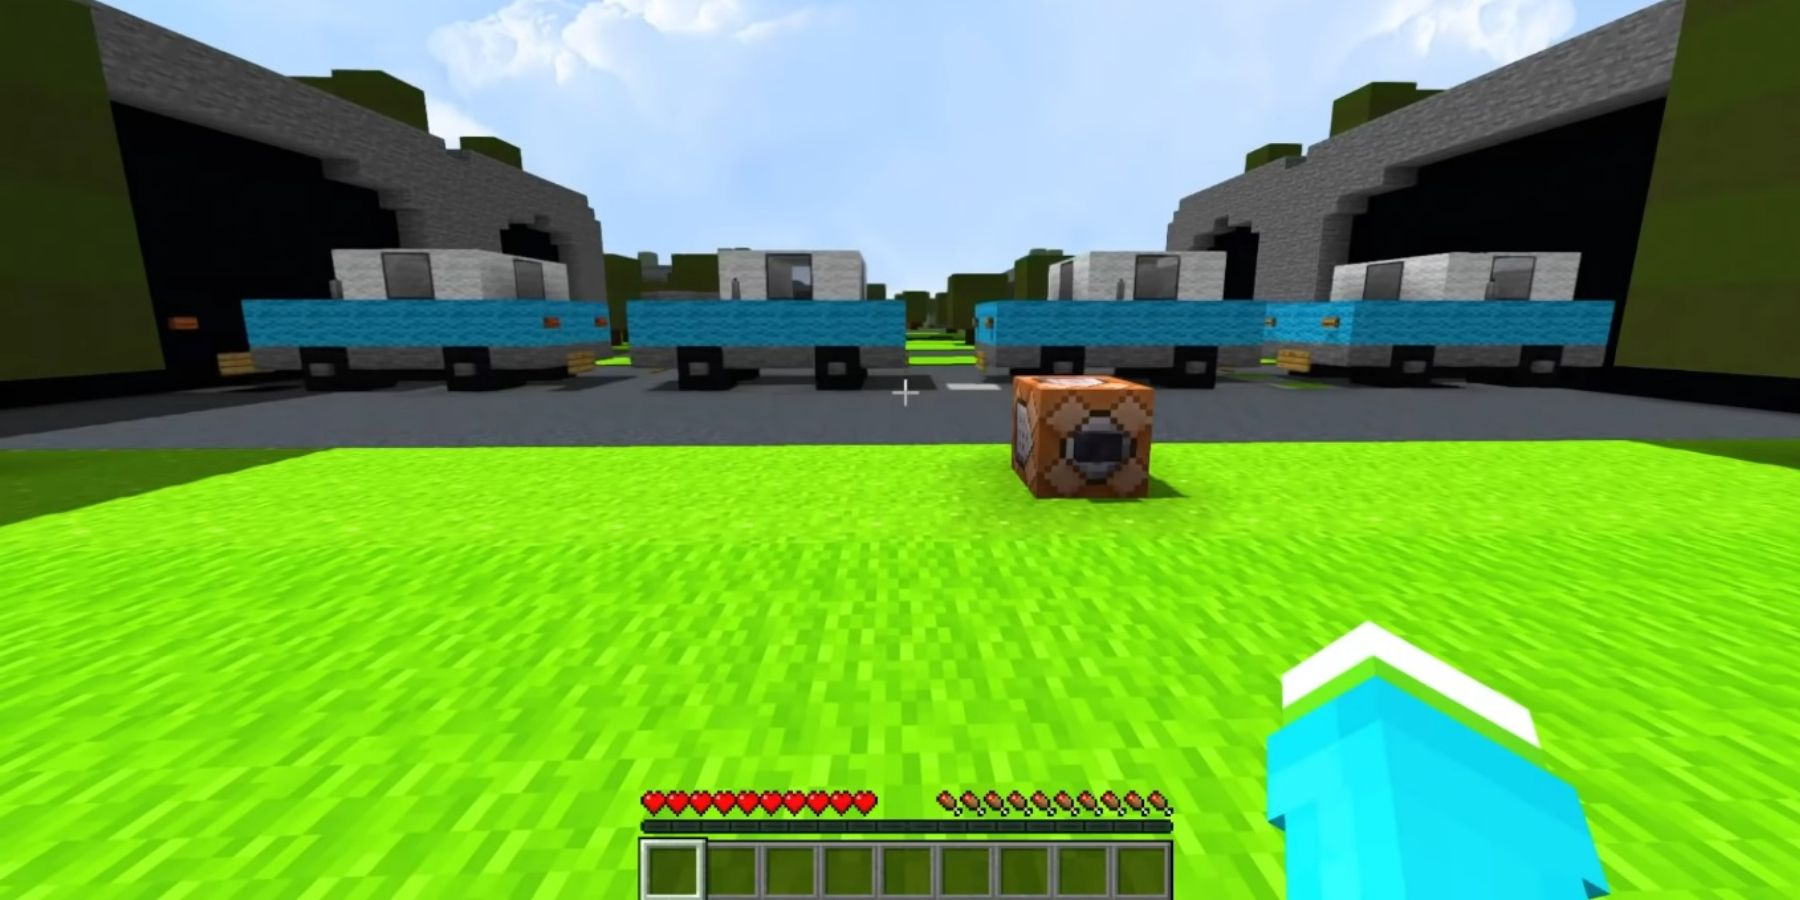 Image from a Minecraft video showing a series of cars moving along a road.